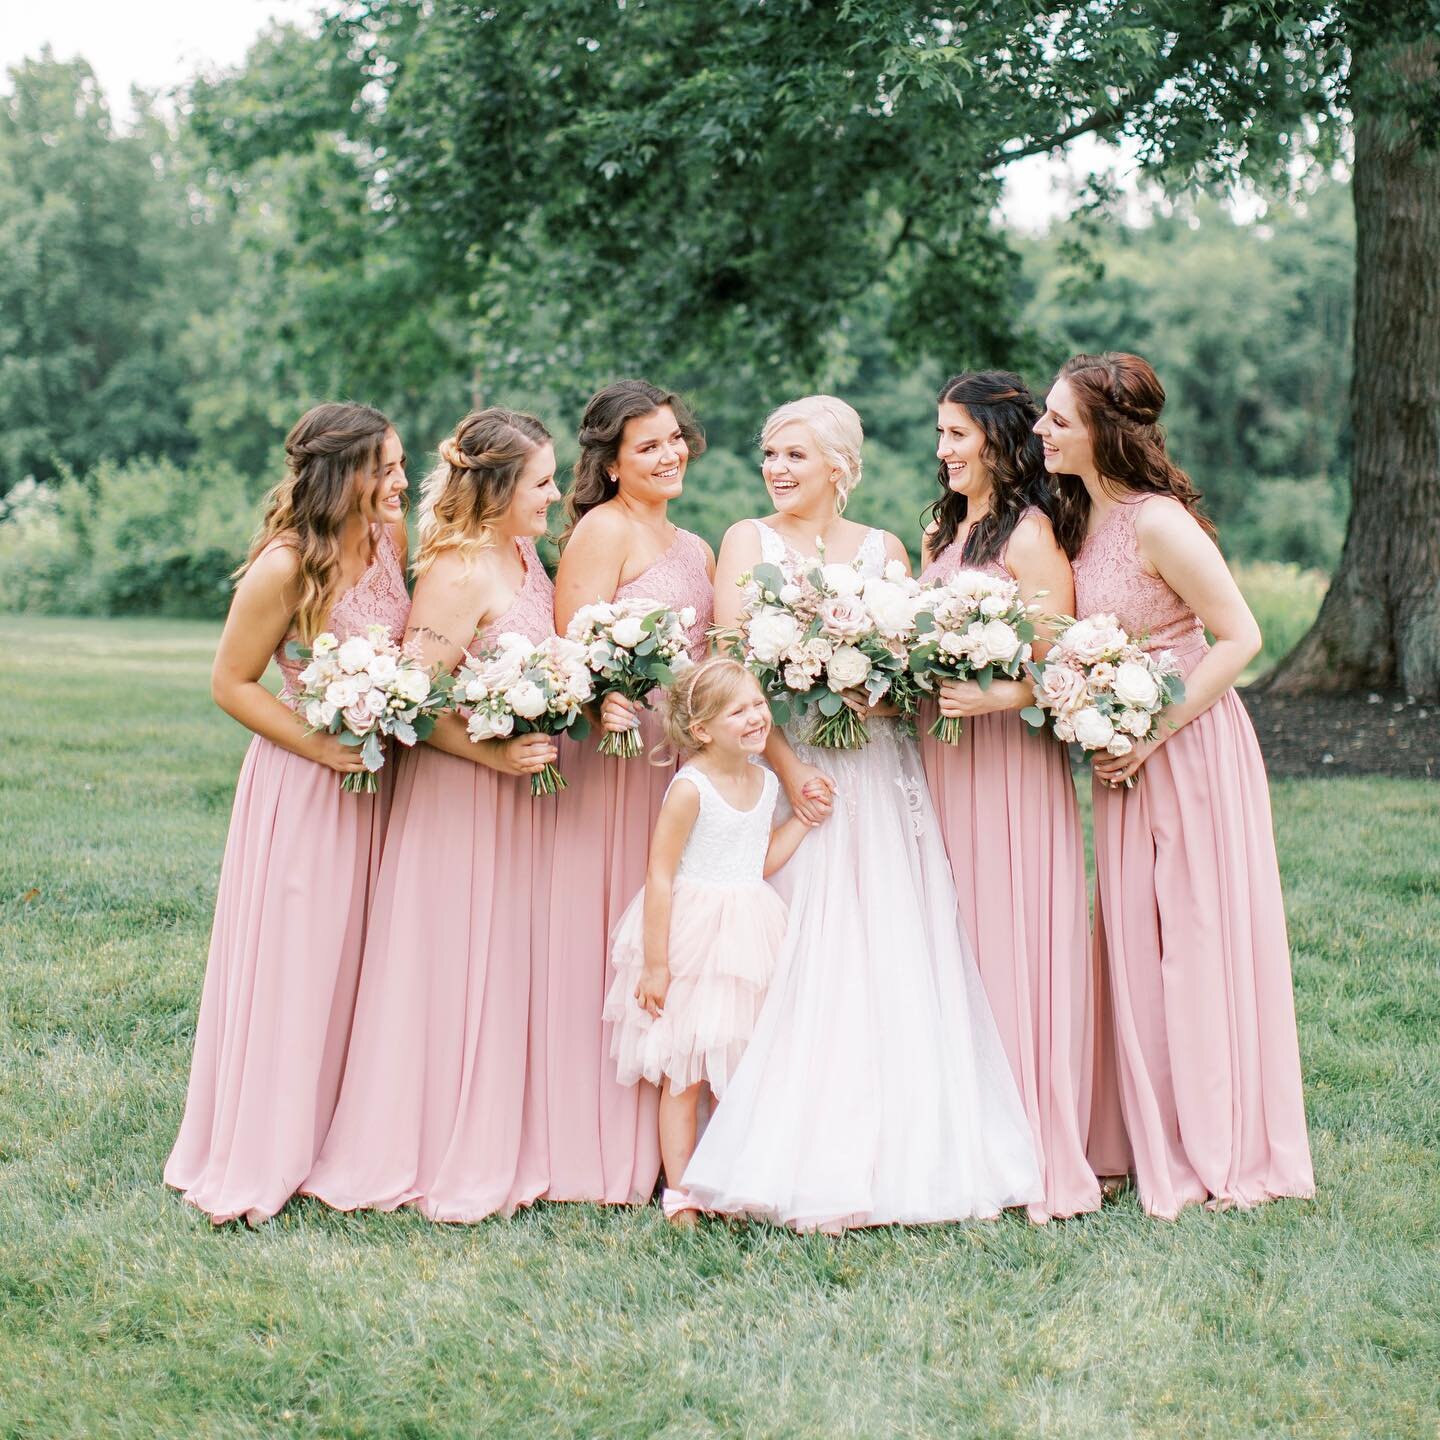 Stephanie and her maids on the beautiful grounds at Mustard Seed Gardens. This was such a special day!! 💕 Photo magic by @samireneephotography